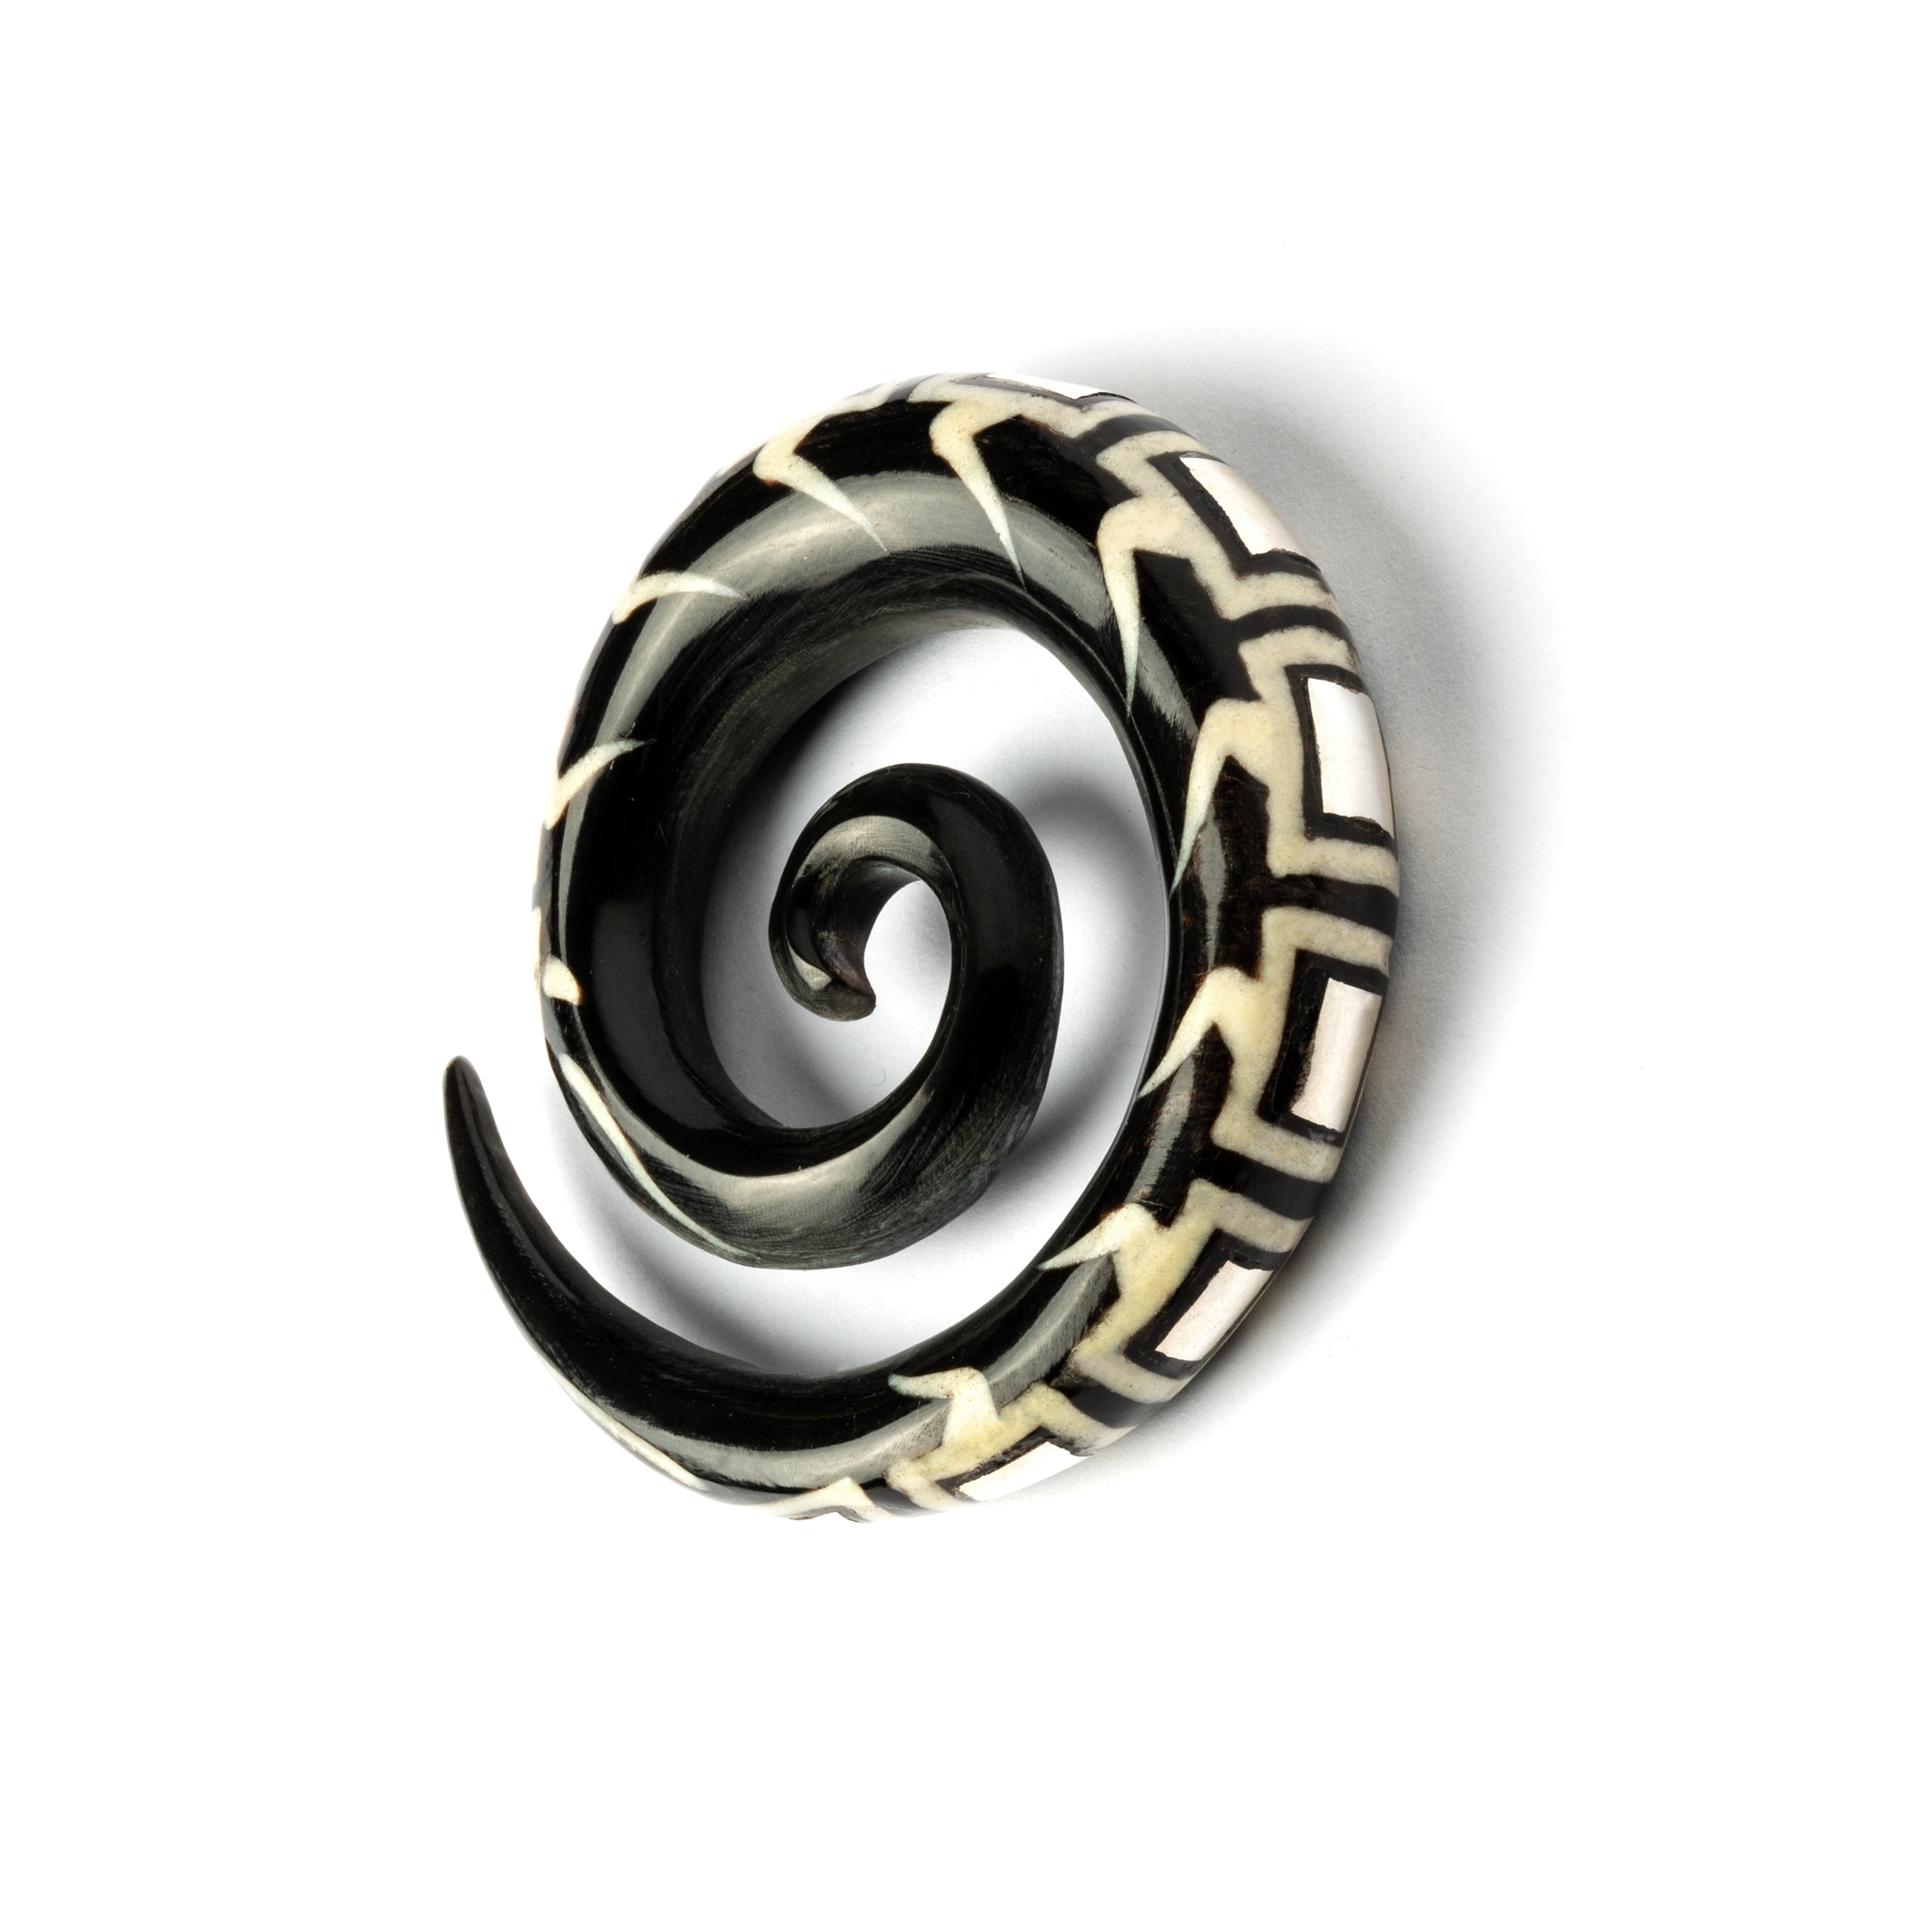 single spiral horn ear stretcher with geometric shaped inlaid with silver right side view